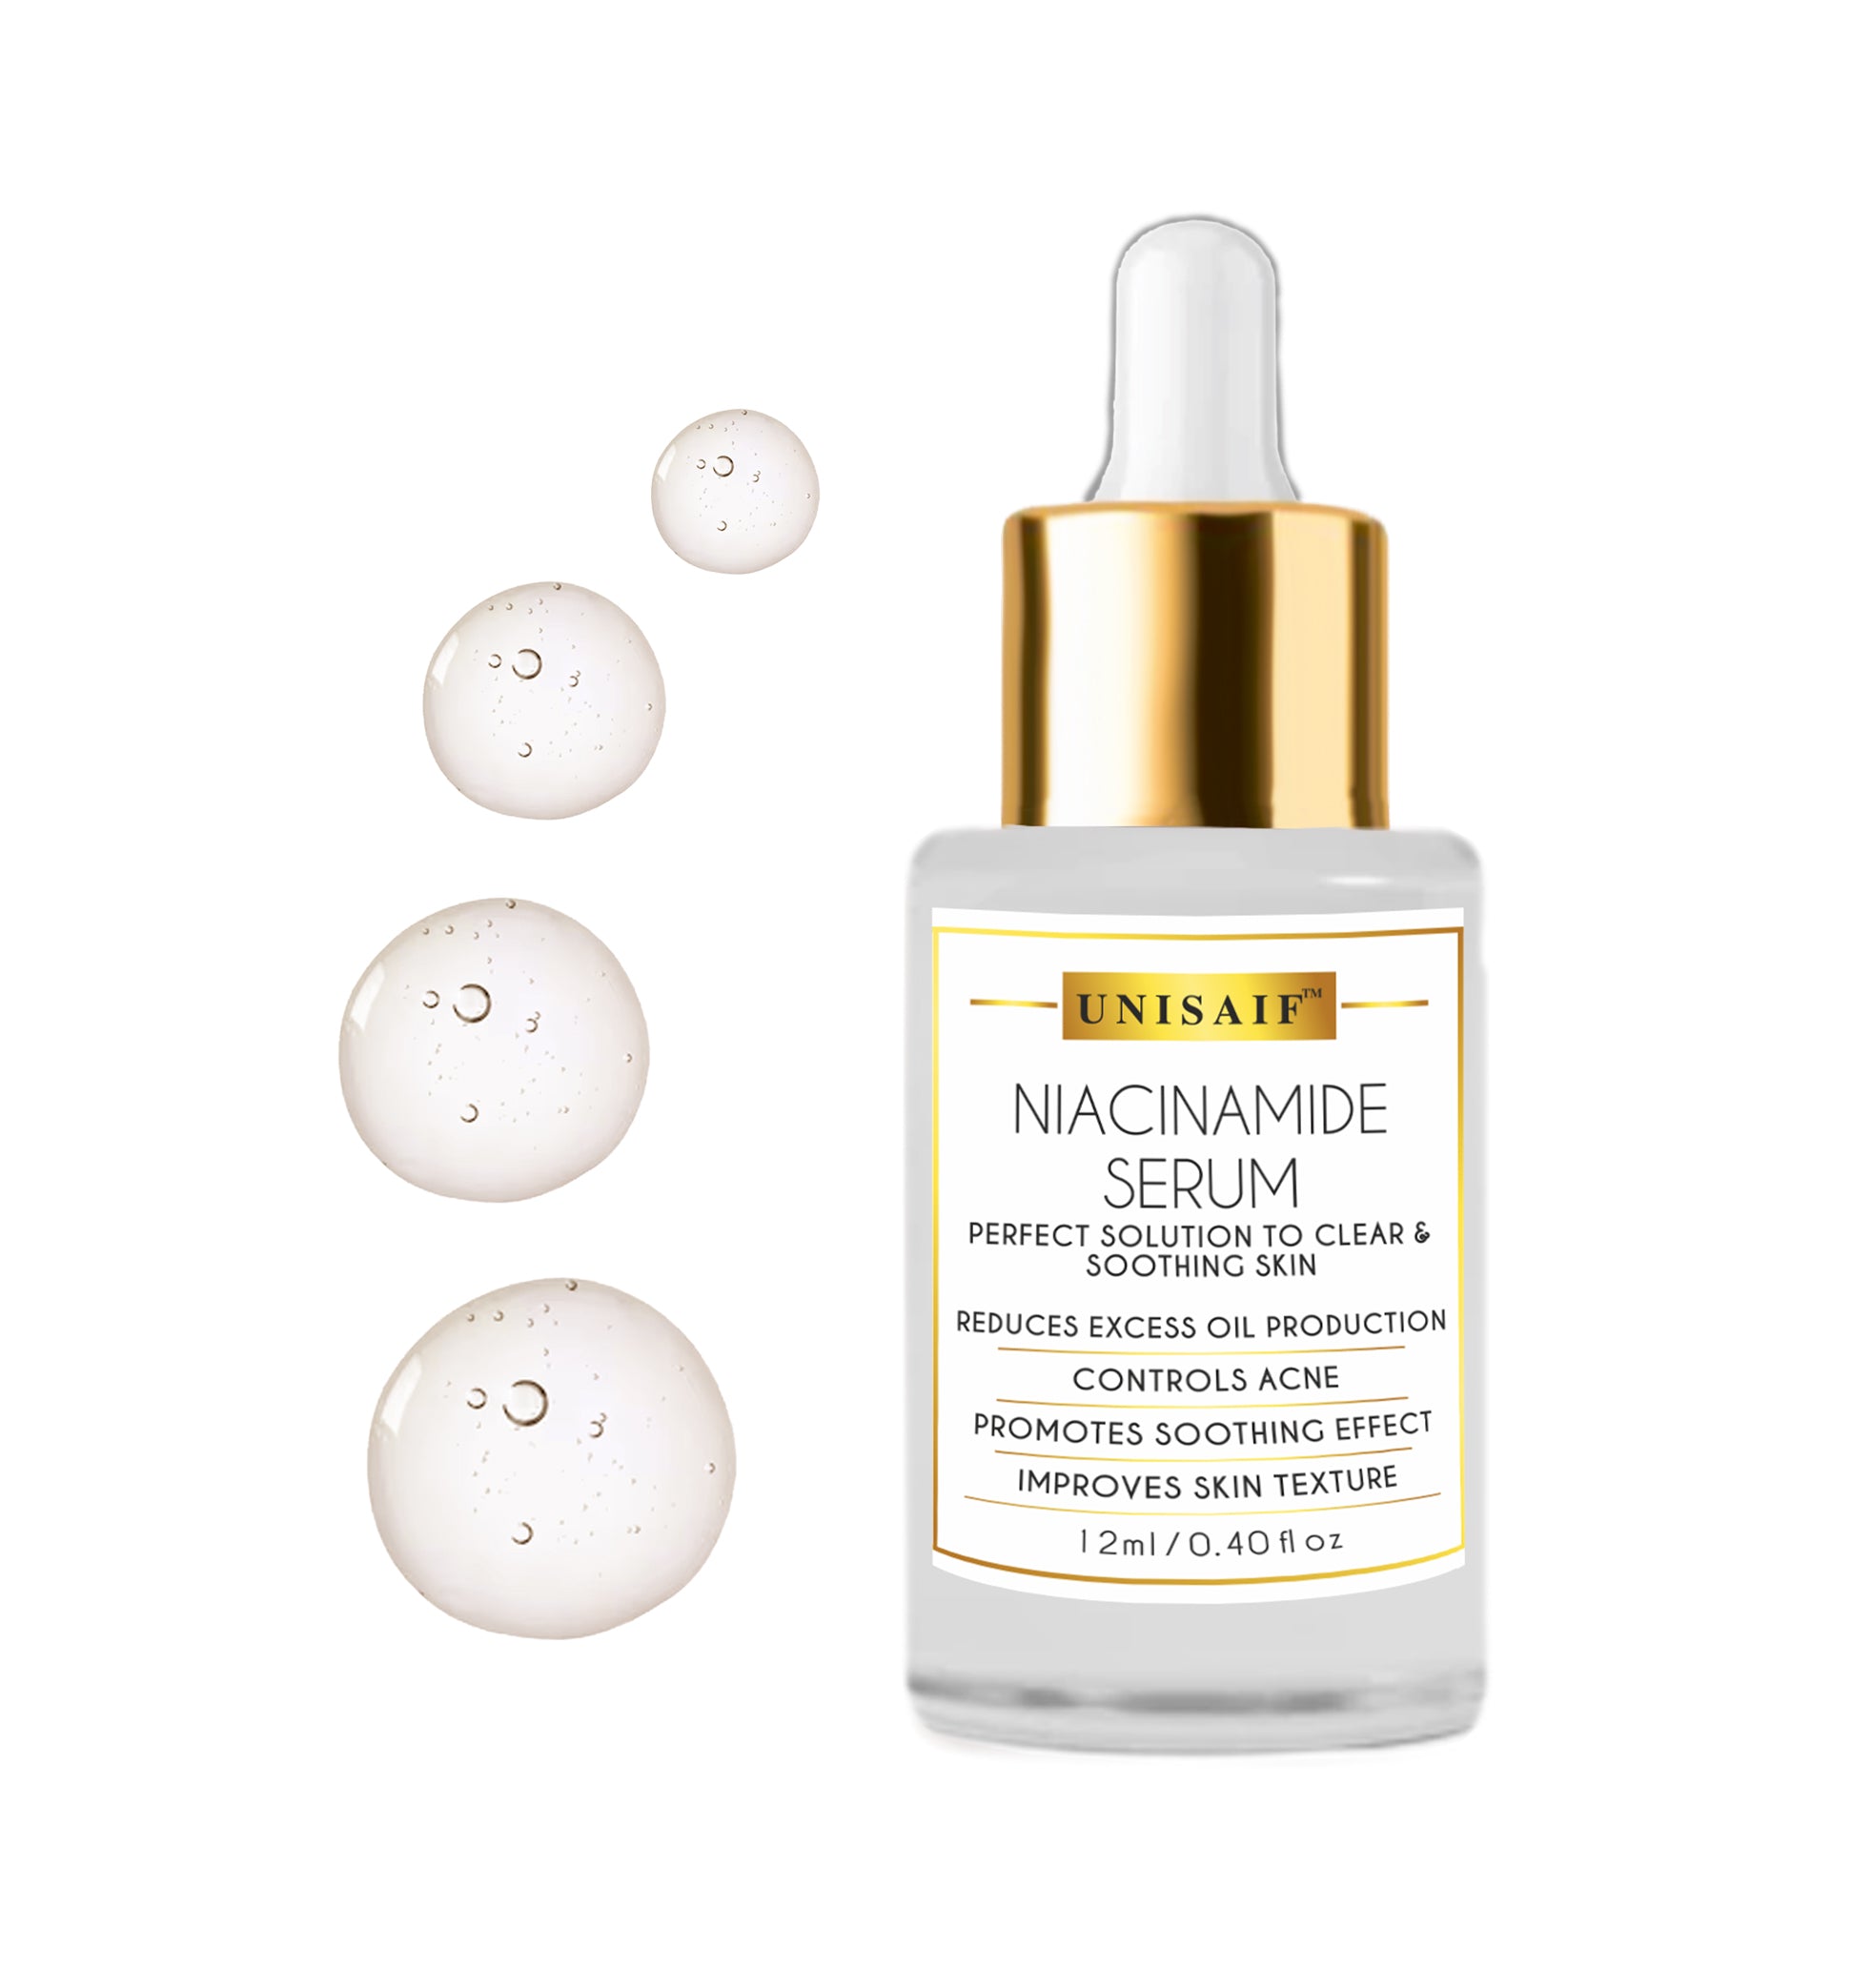 Niacinamide Serum 5% (12ml) | Acne| Blemish & Pores Reduction| Hydration| Soothes Irritation